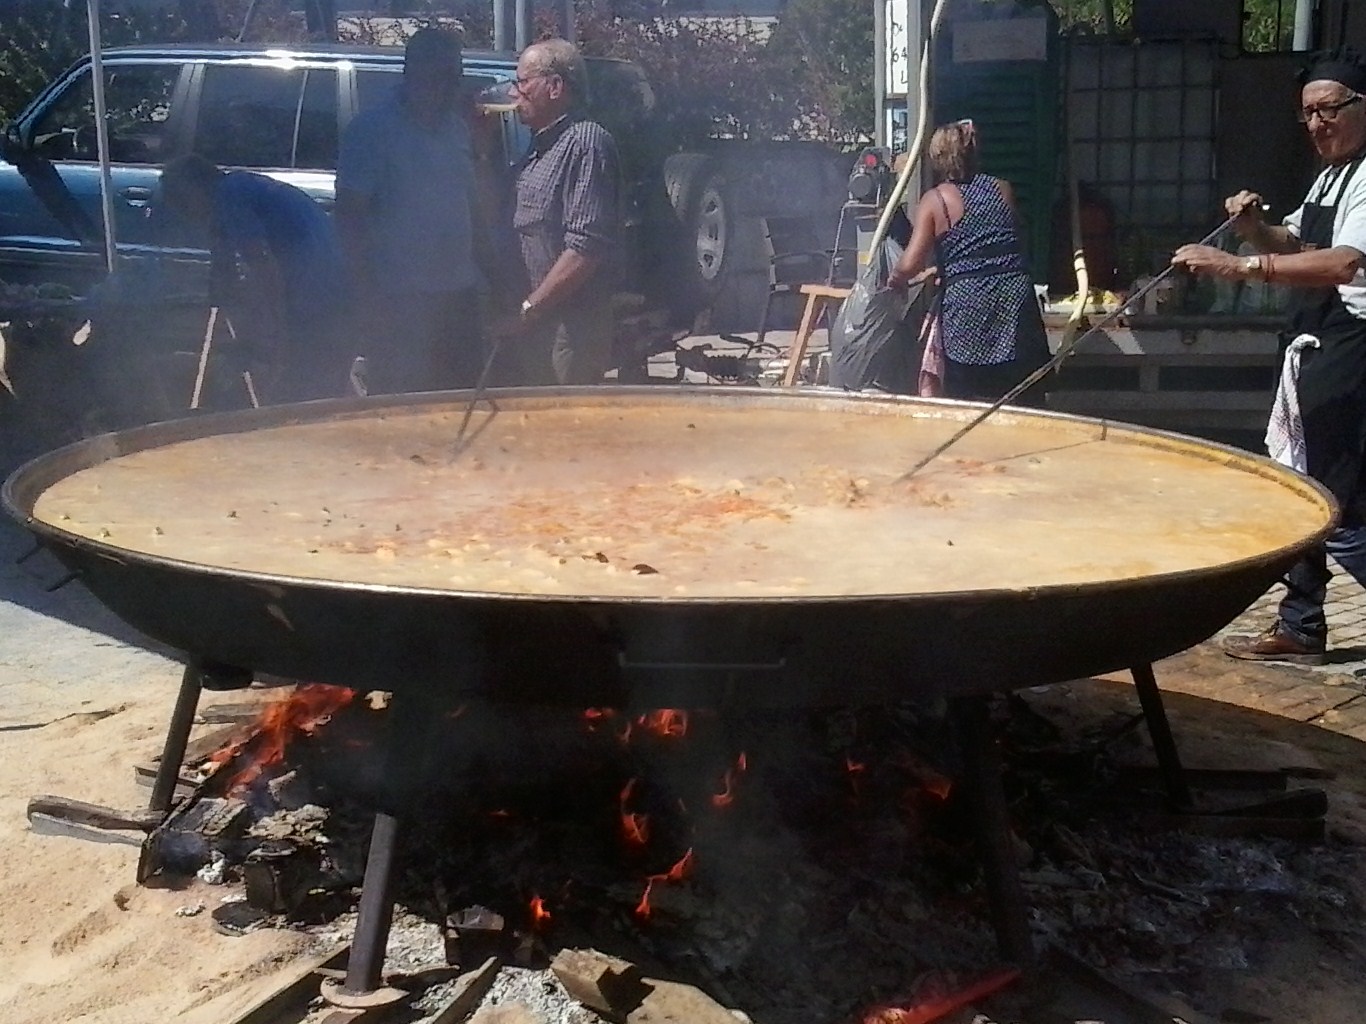 Candás, Asturias: It seems like every day is a saint day in Spain. This was the Day of Asturias. September 8, another giant paella day.